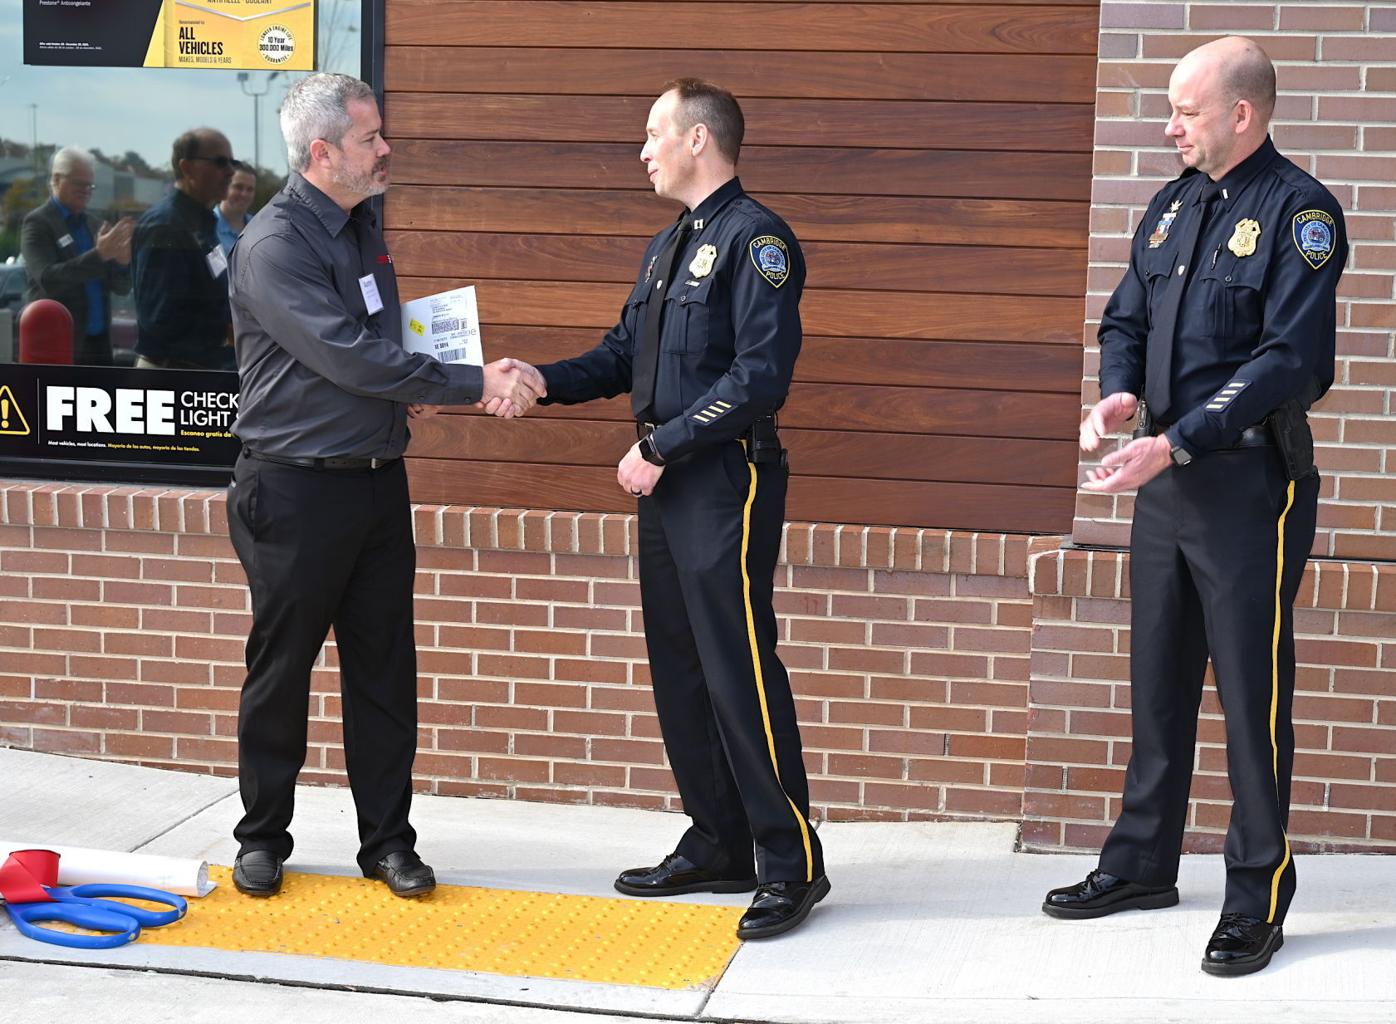 Advance Auto Parts has Ribbon cutting and begins gift card program with Cambridge Police